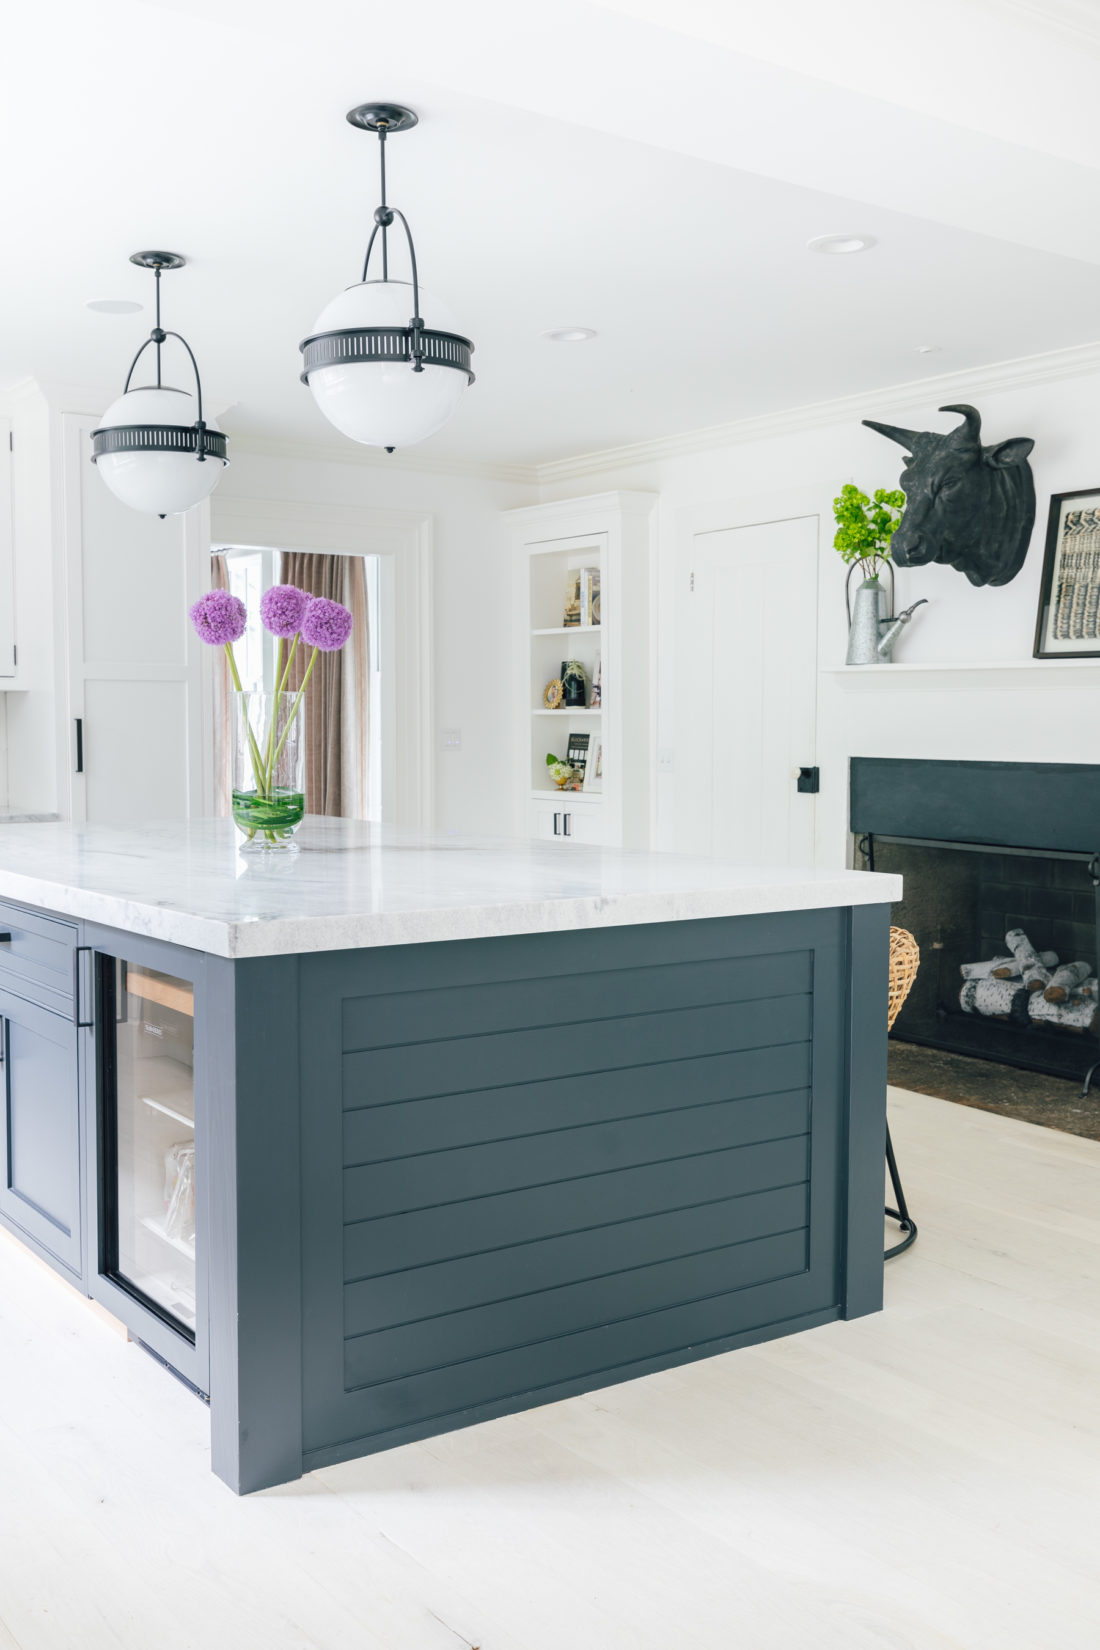 Eva Amurri Martino shares her renovated kitchen in her historical Connecticut home, featuring an open plan and a modern look